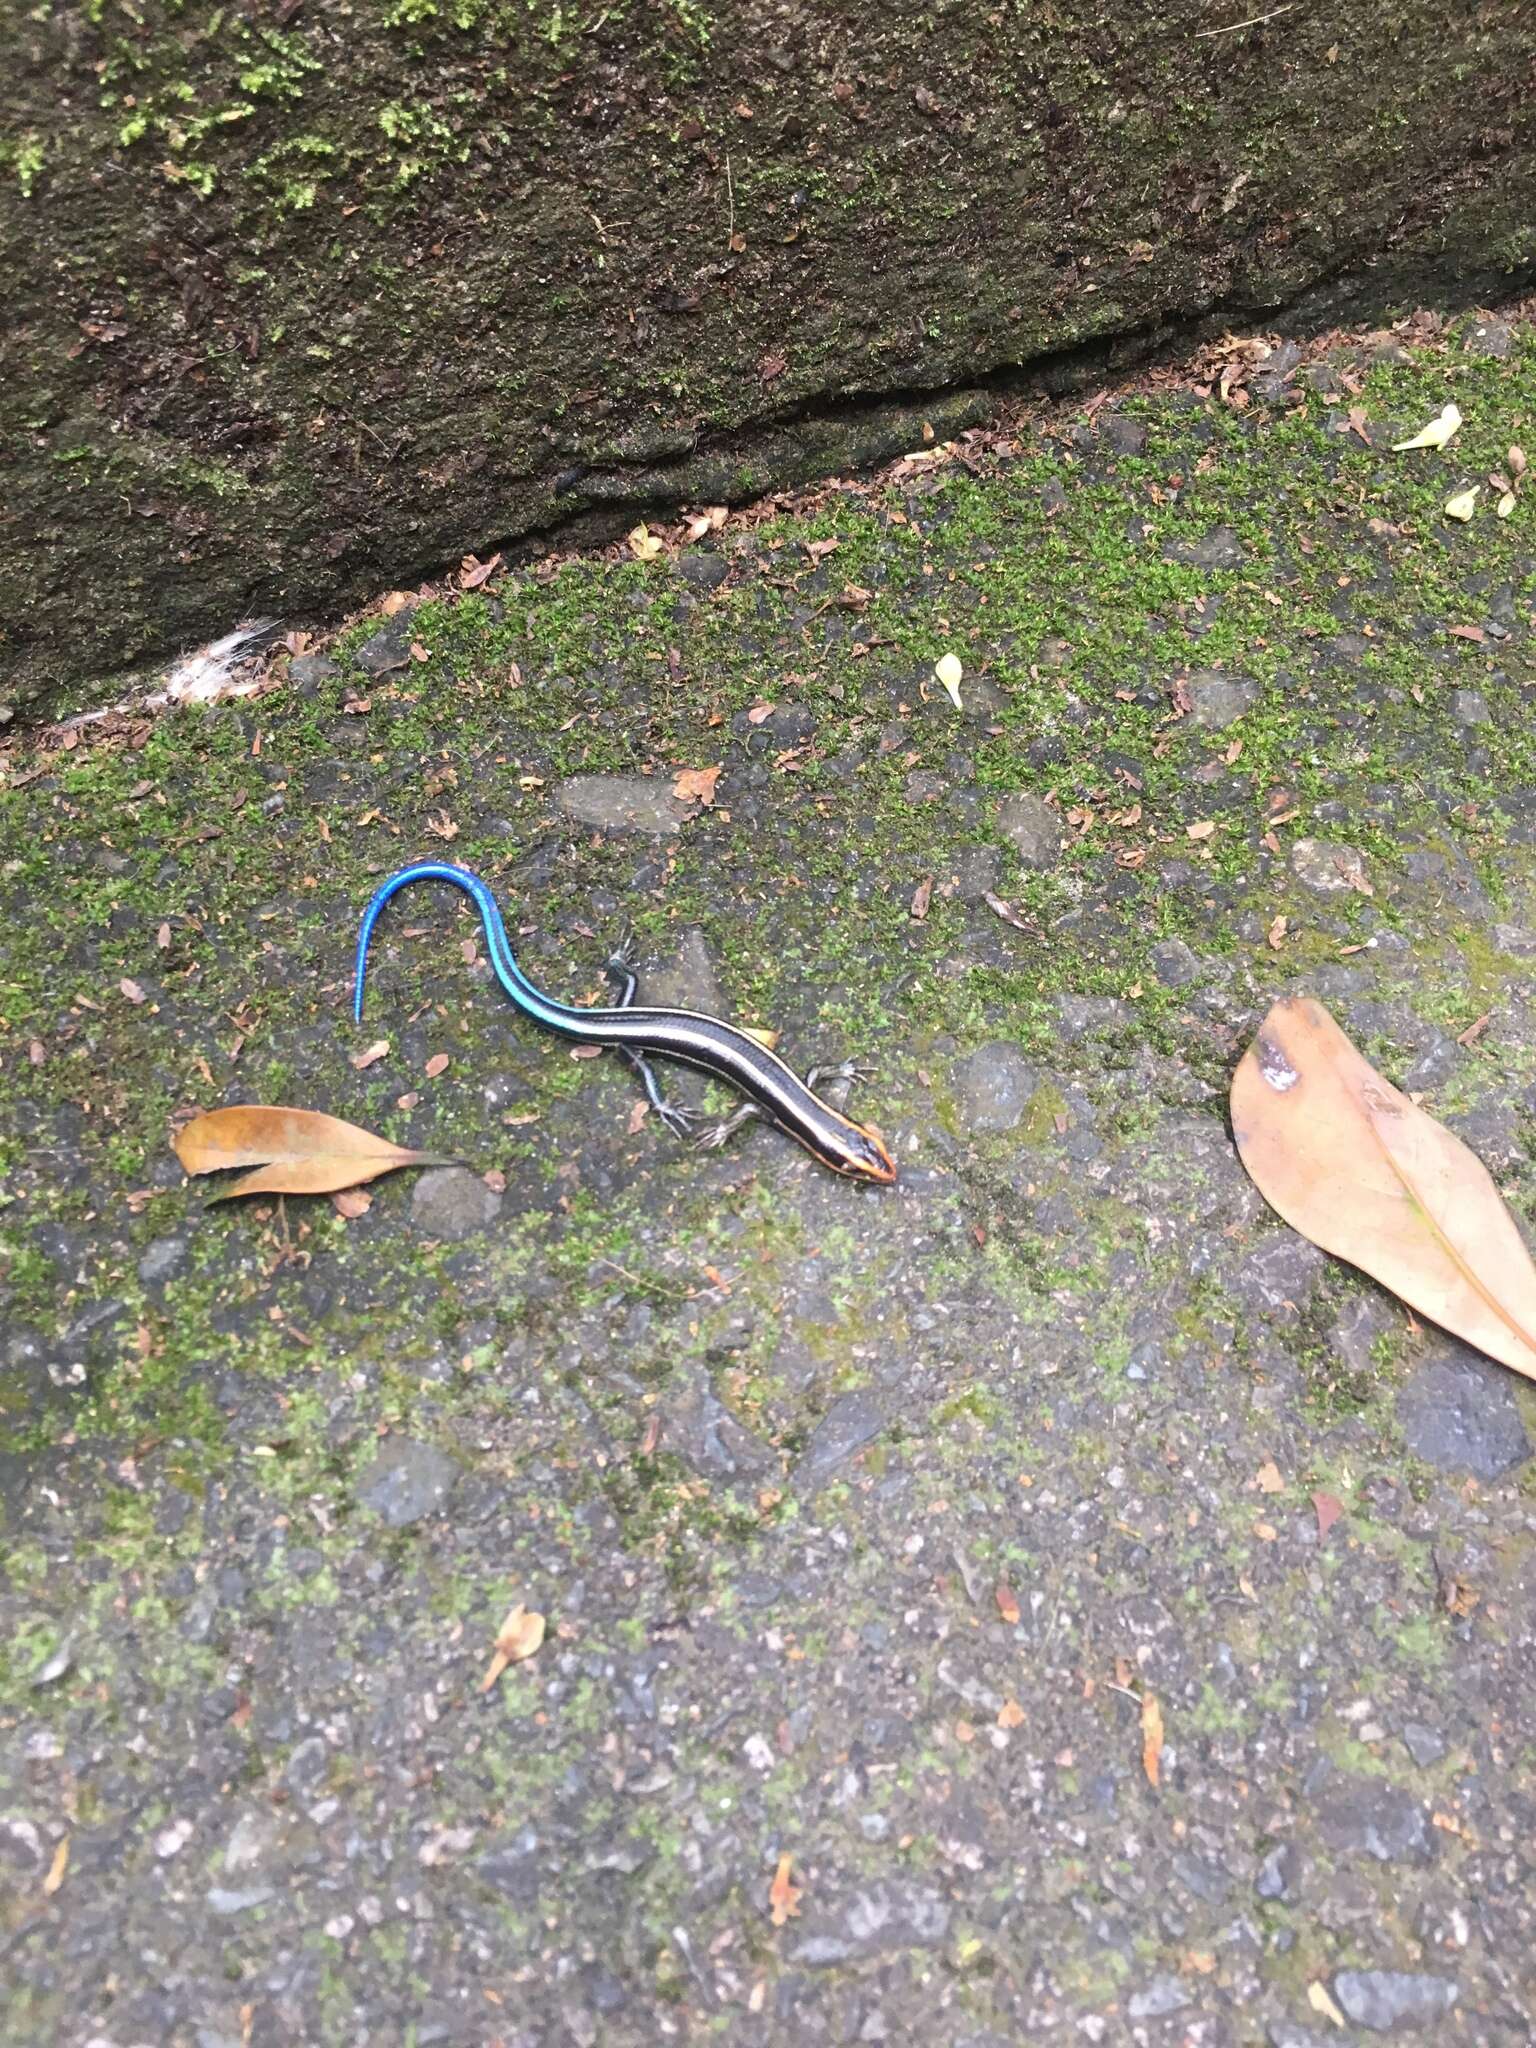 Image of Four-striped Skink